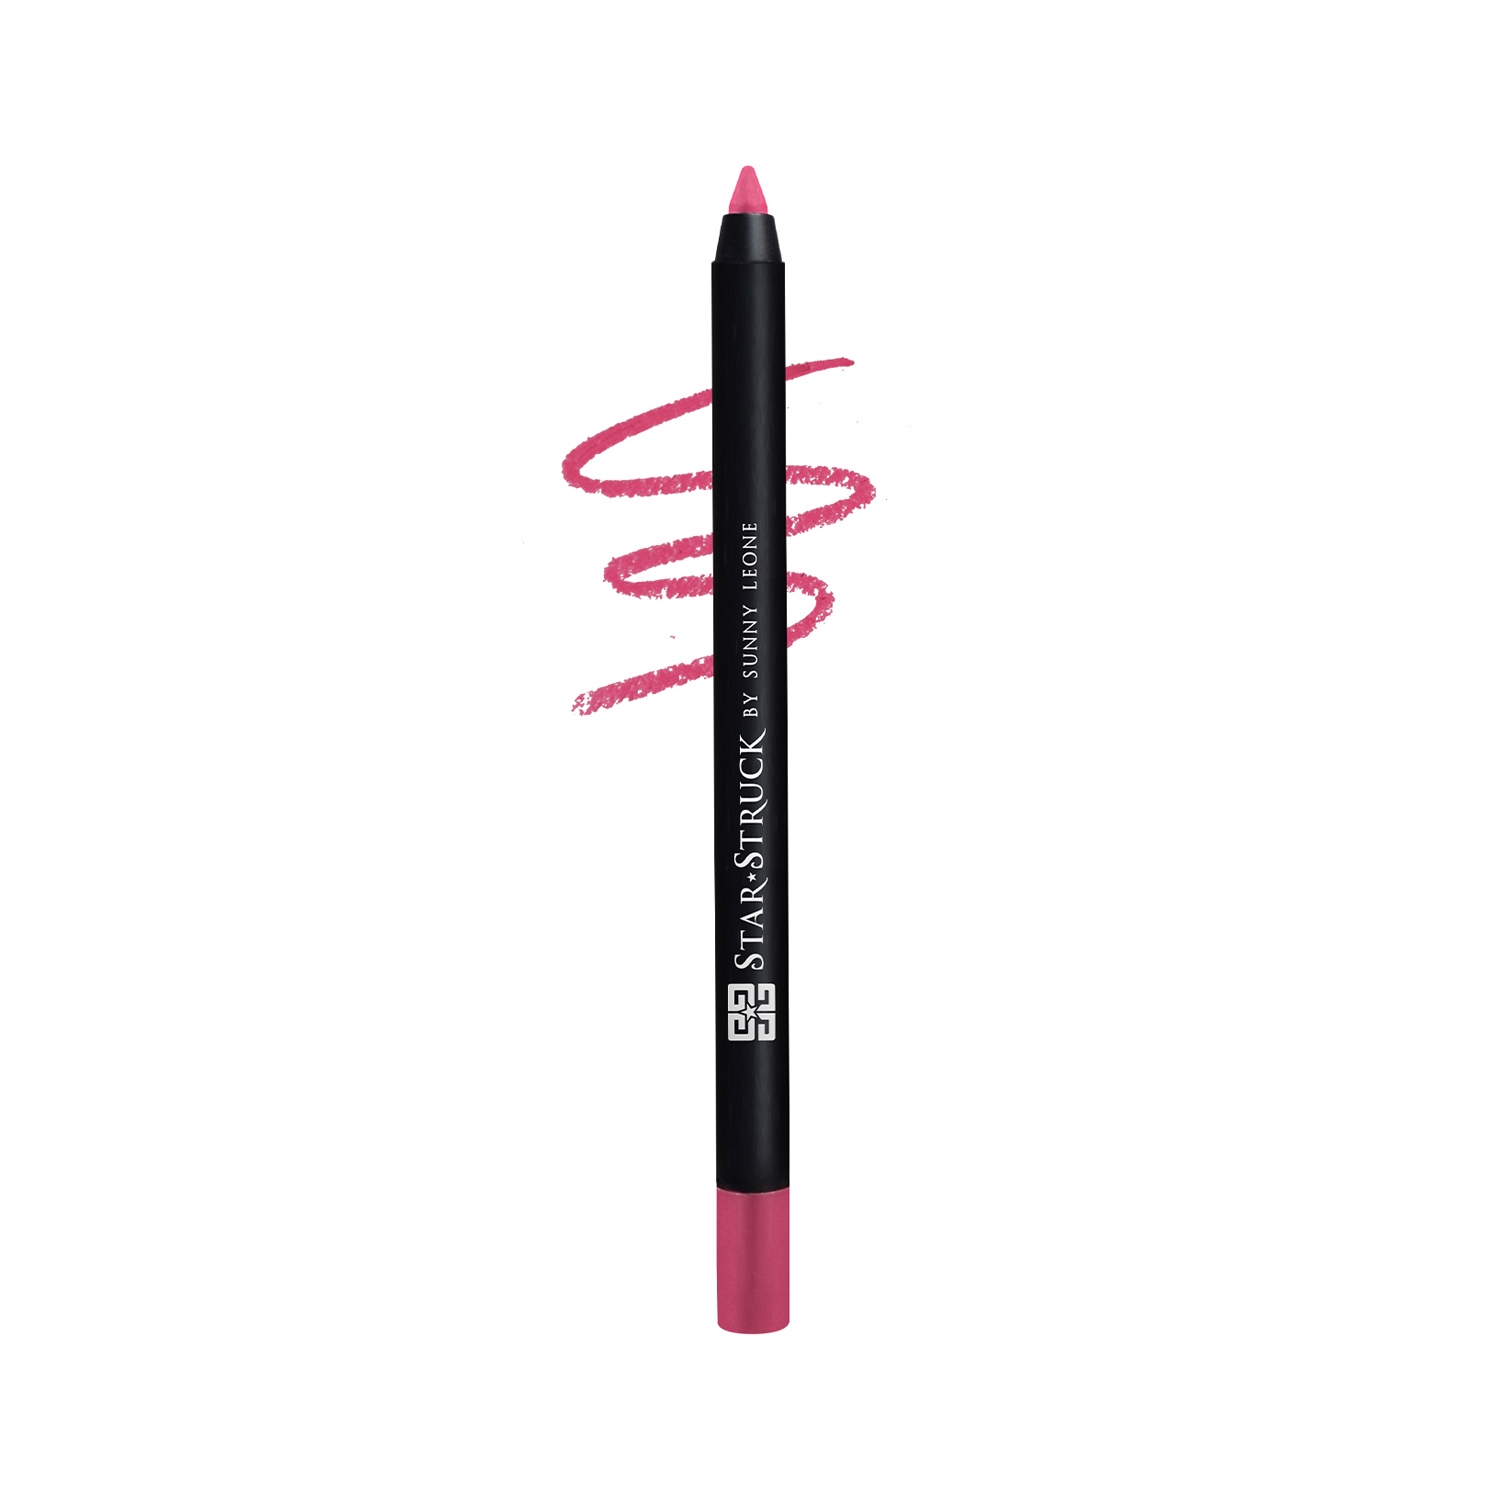 Star Struck by Sunny Leone | Star Struck by Sunny Leone Long Wear Lip Liner - Kiss Me Pink (1.2g)